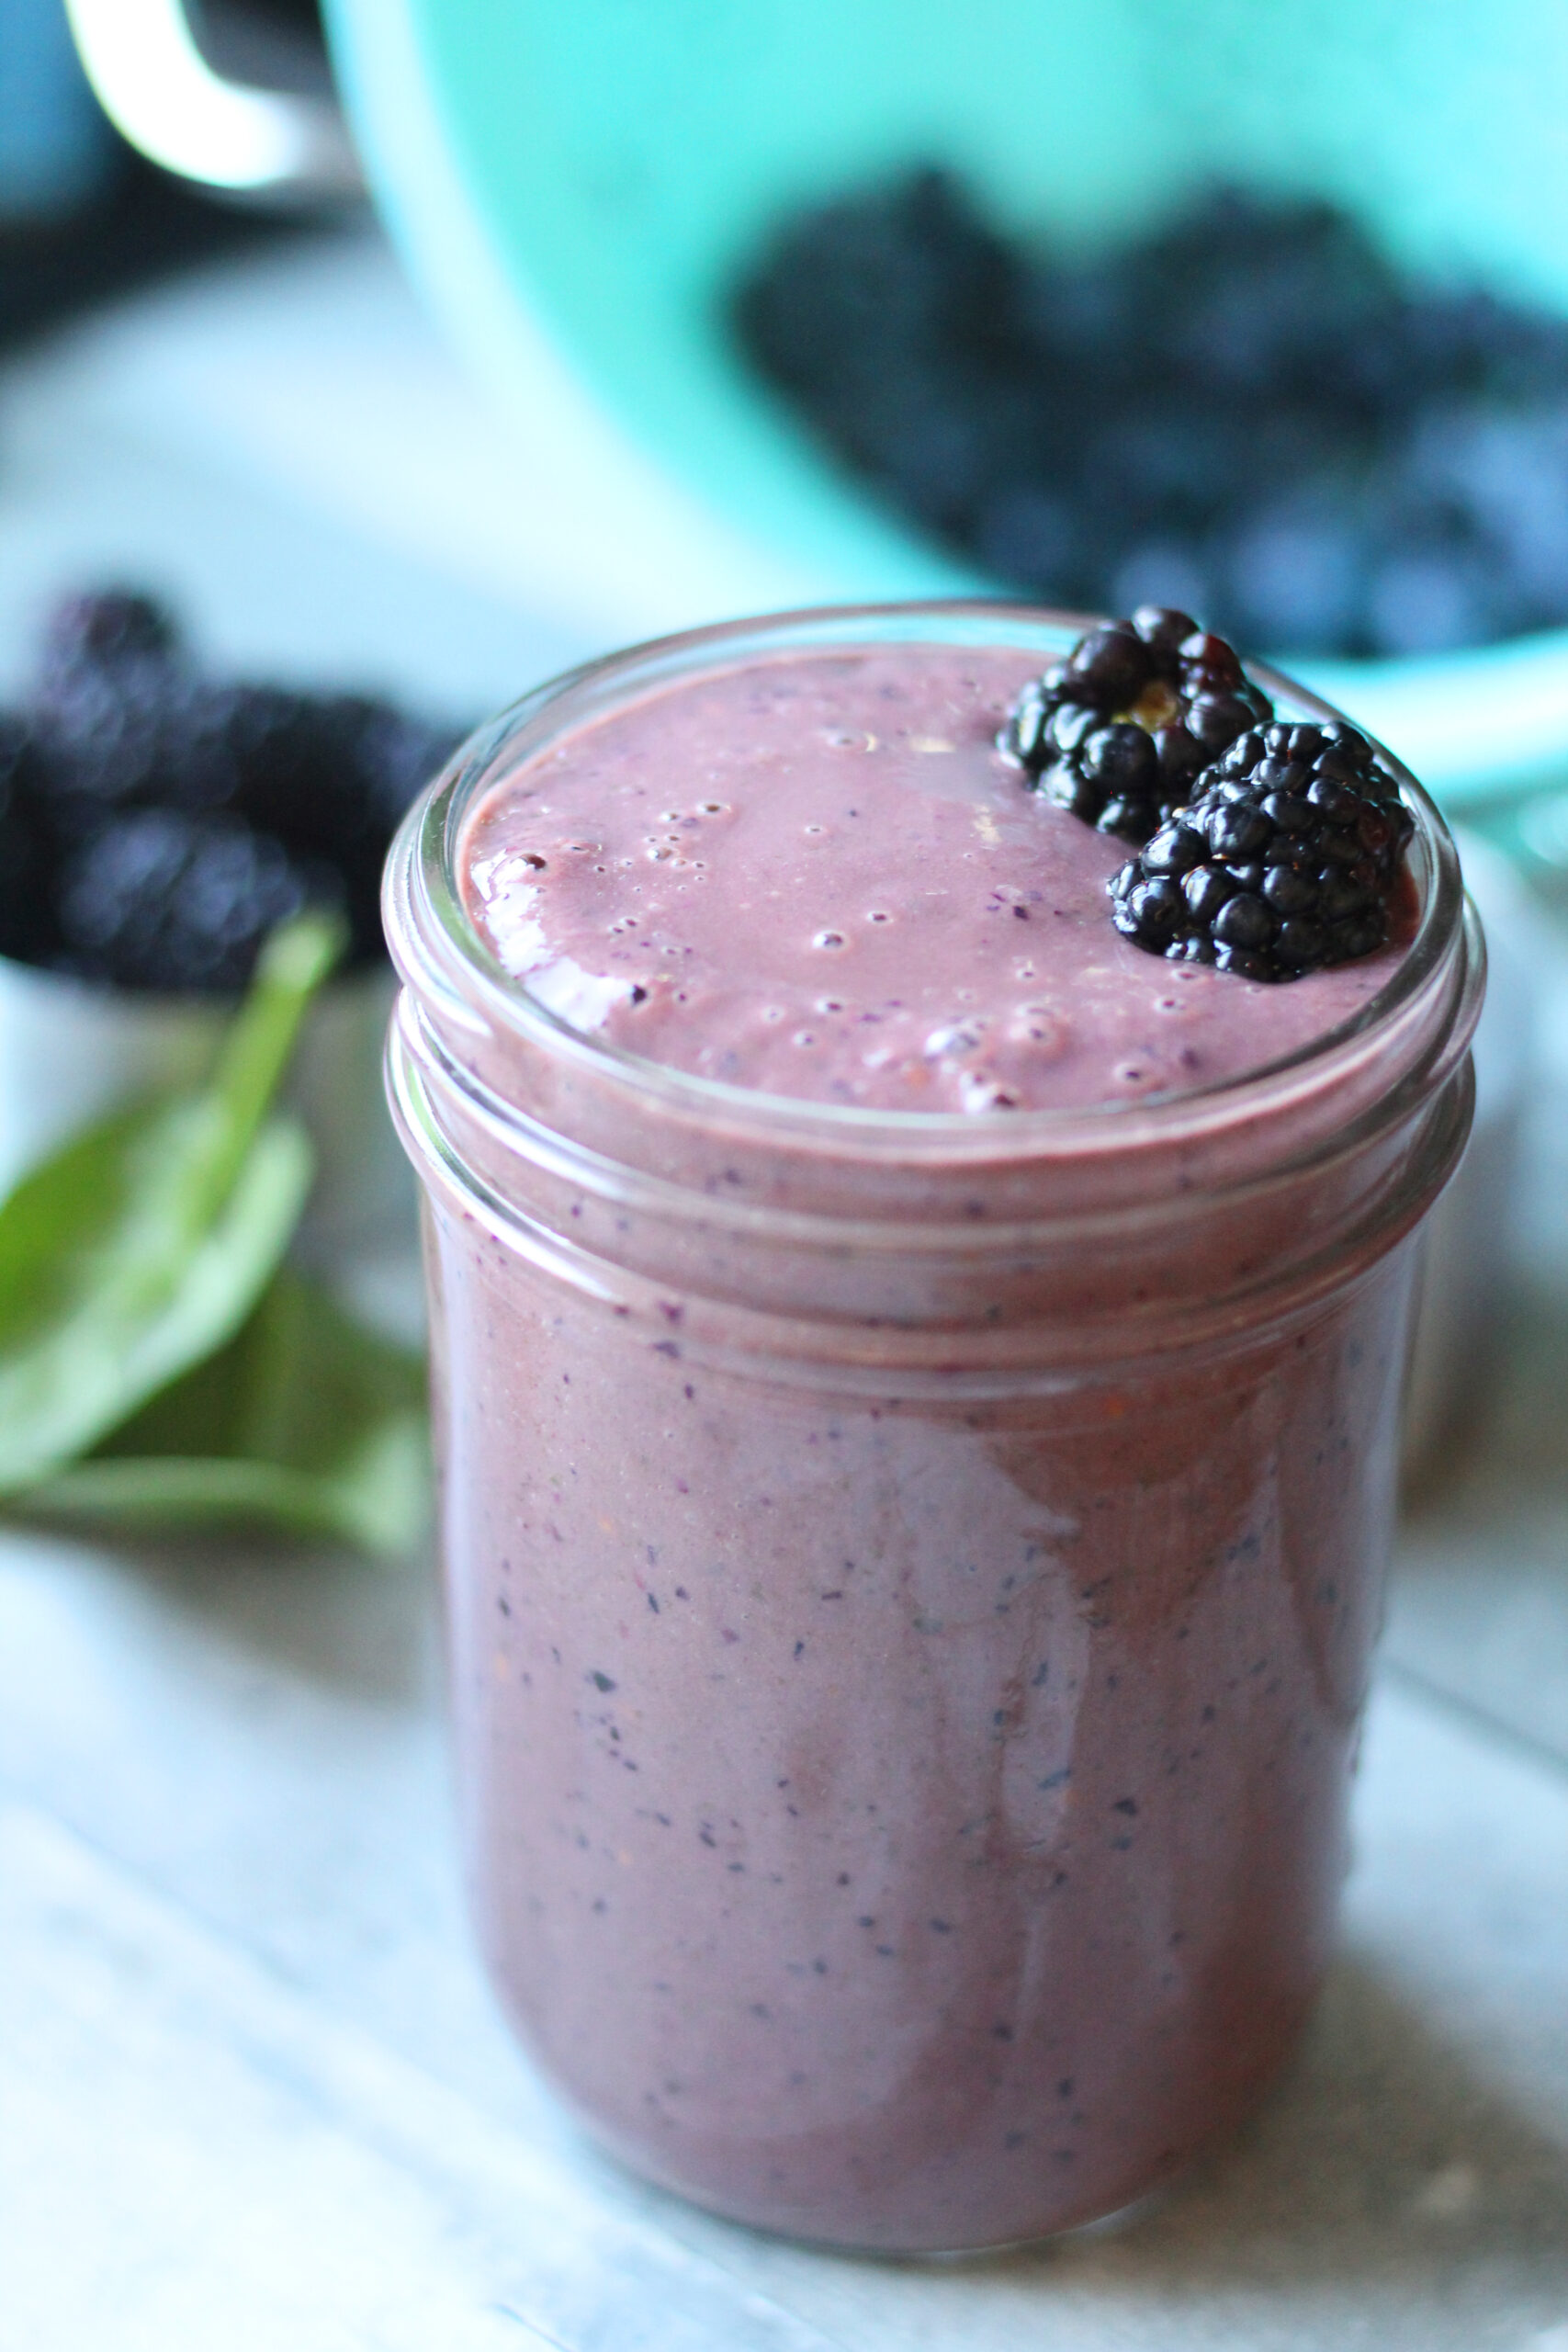 Blueberry Smoothie Made With a Mason Jar Blender - In My Own Style